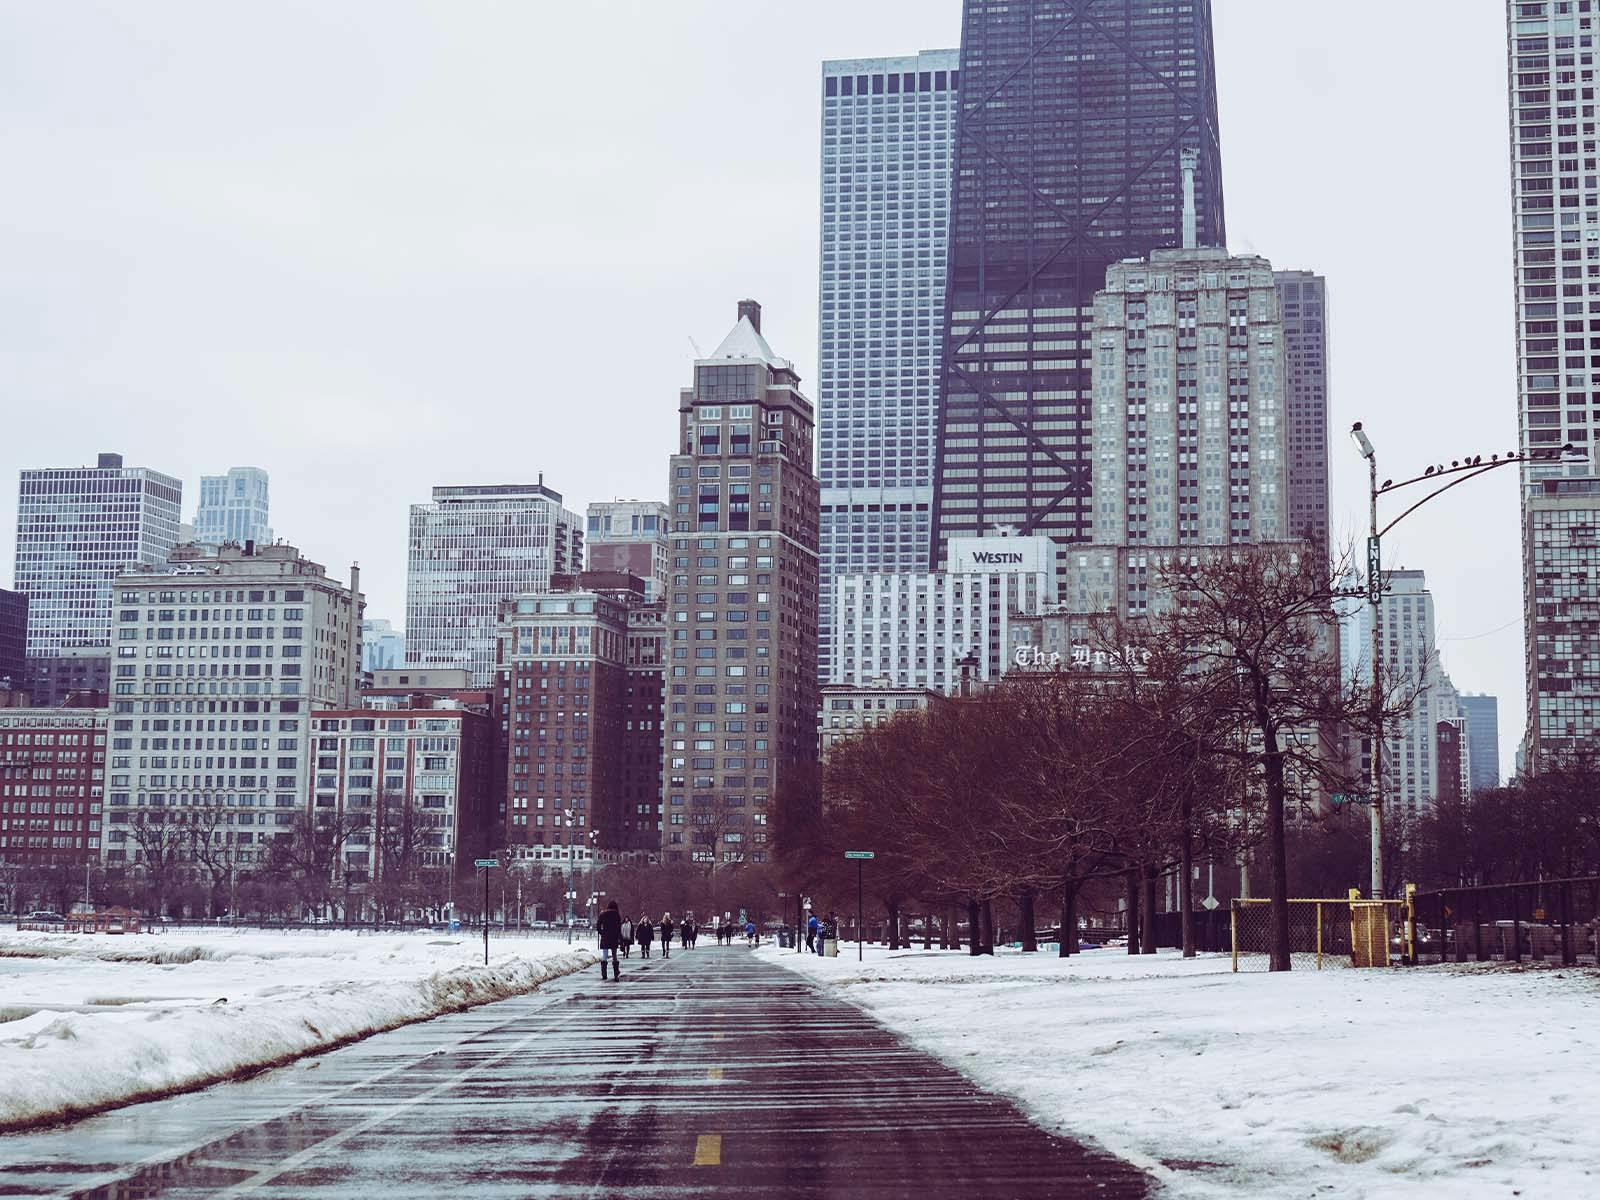 EVA's Top 5 Things to Do and See During Chicago Winter